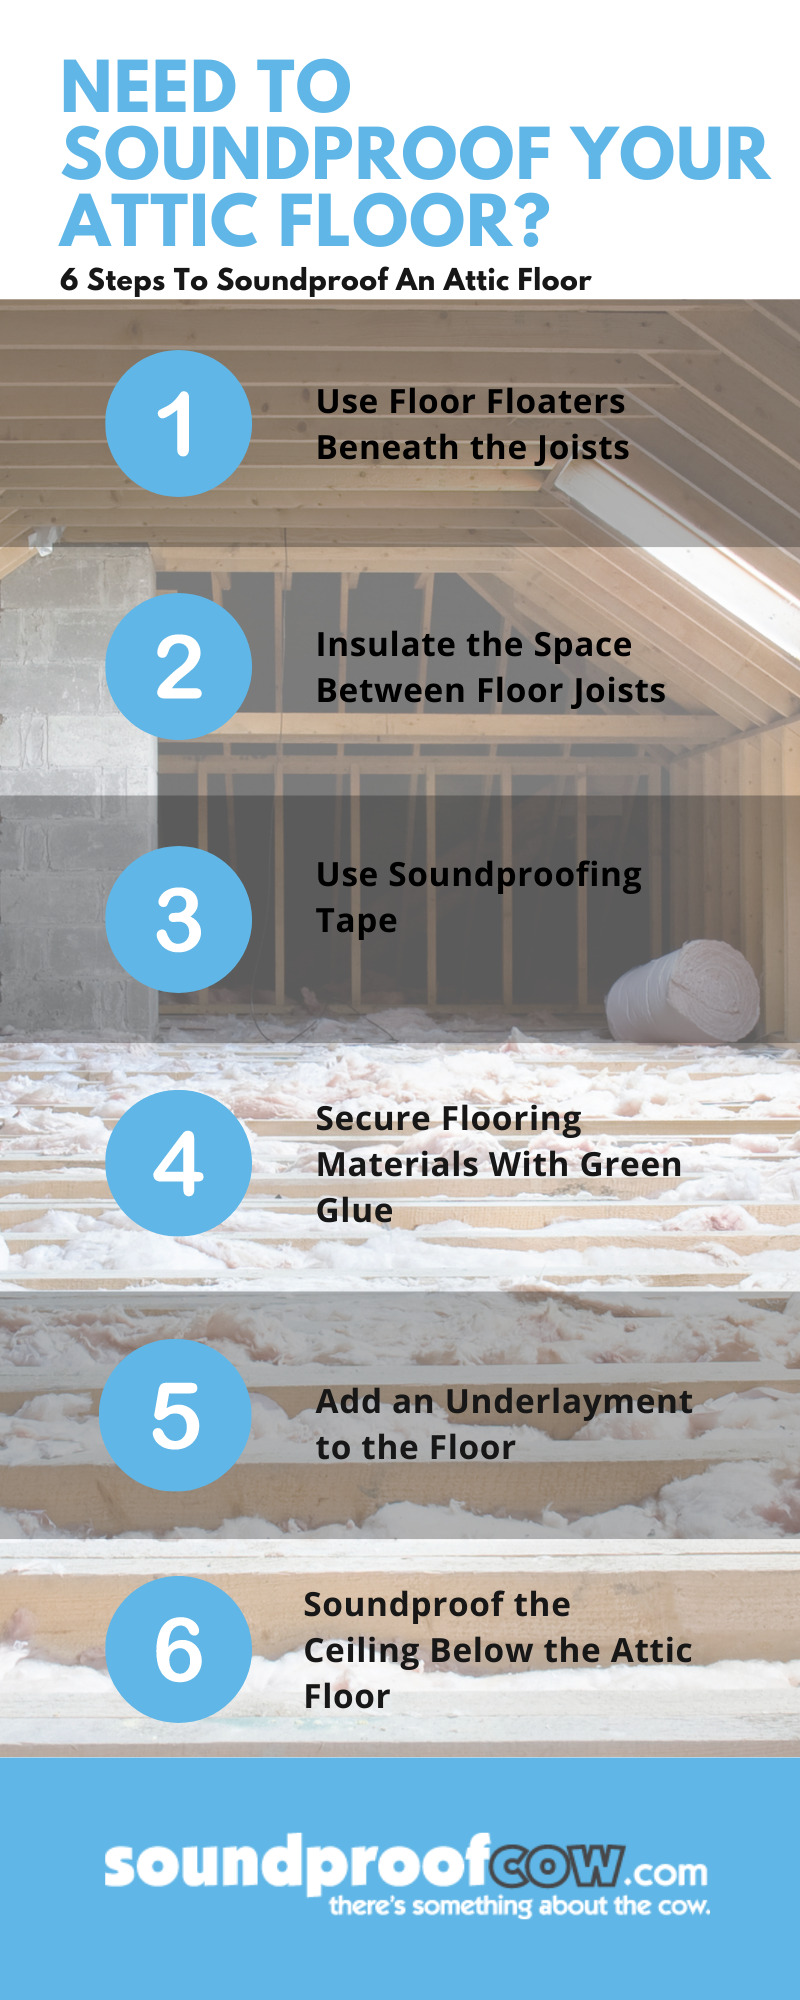 Steps to Soundproof Your Attic Floor